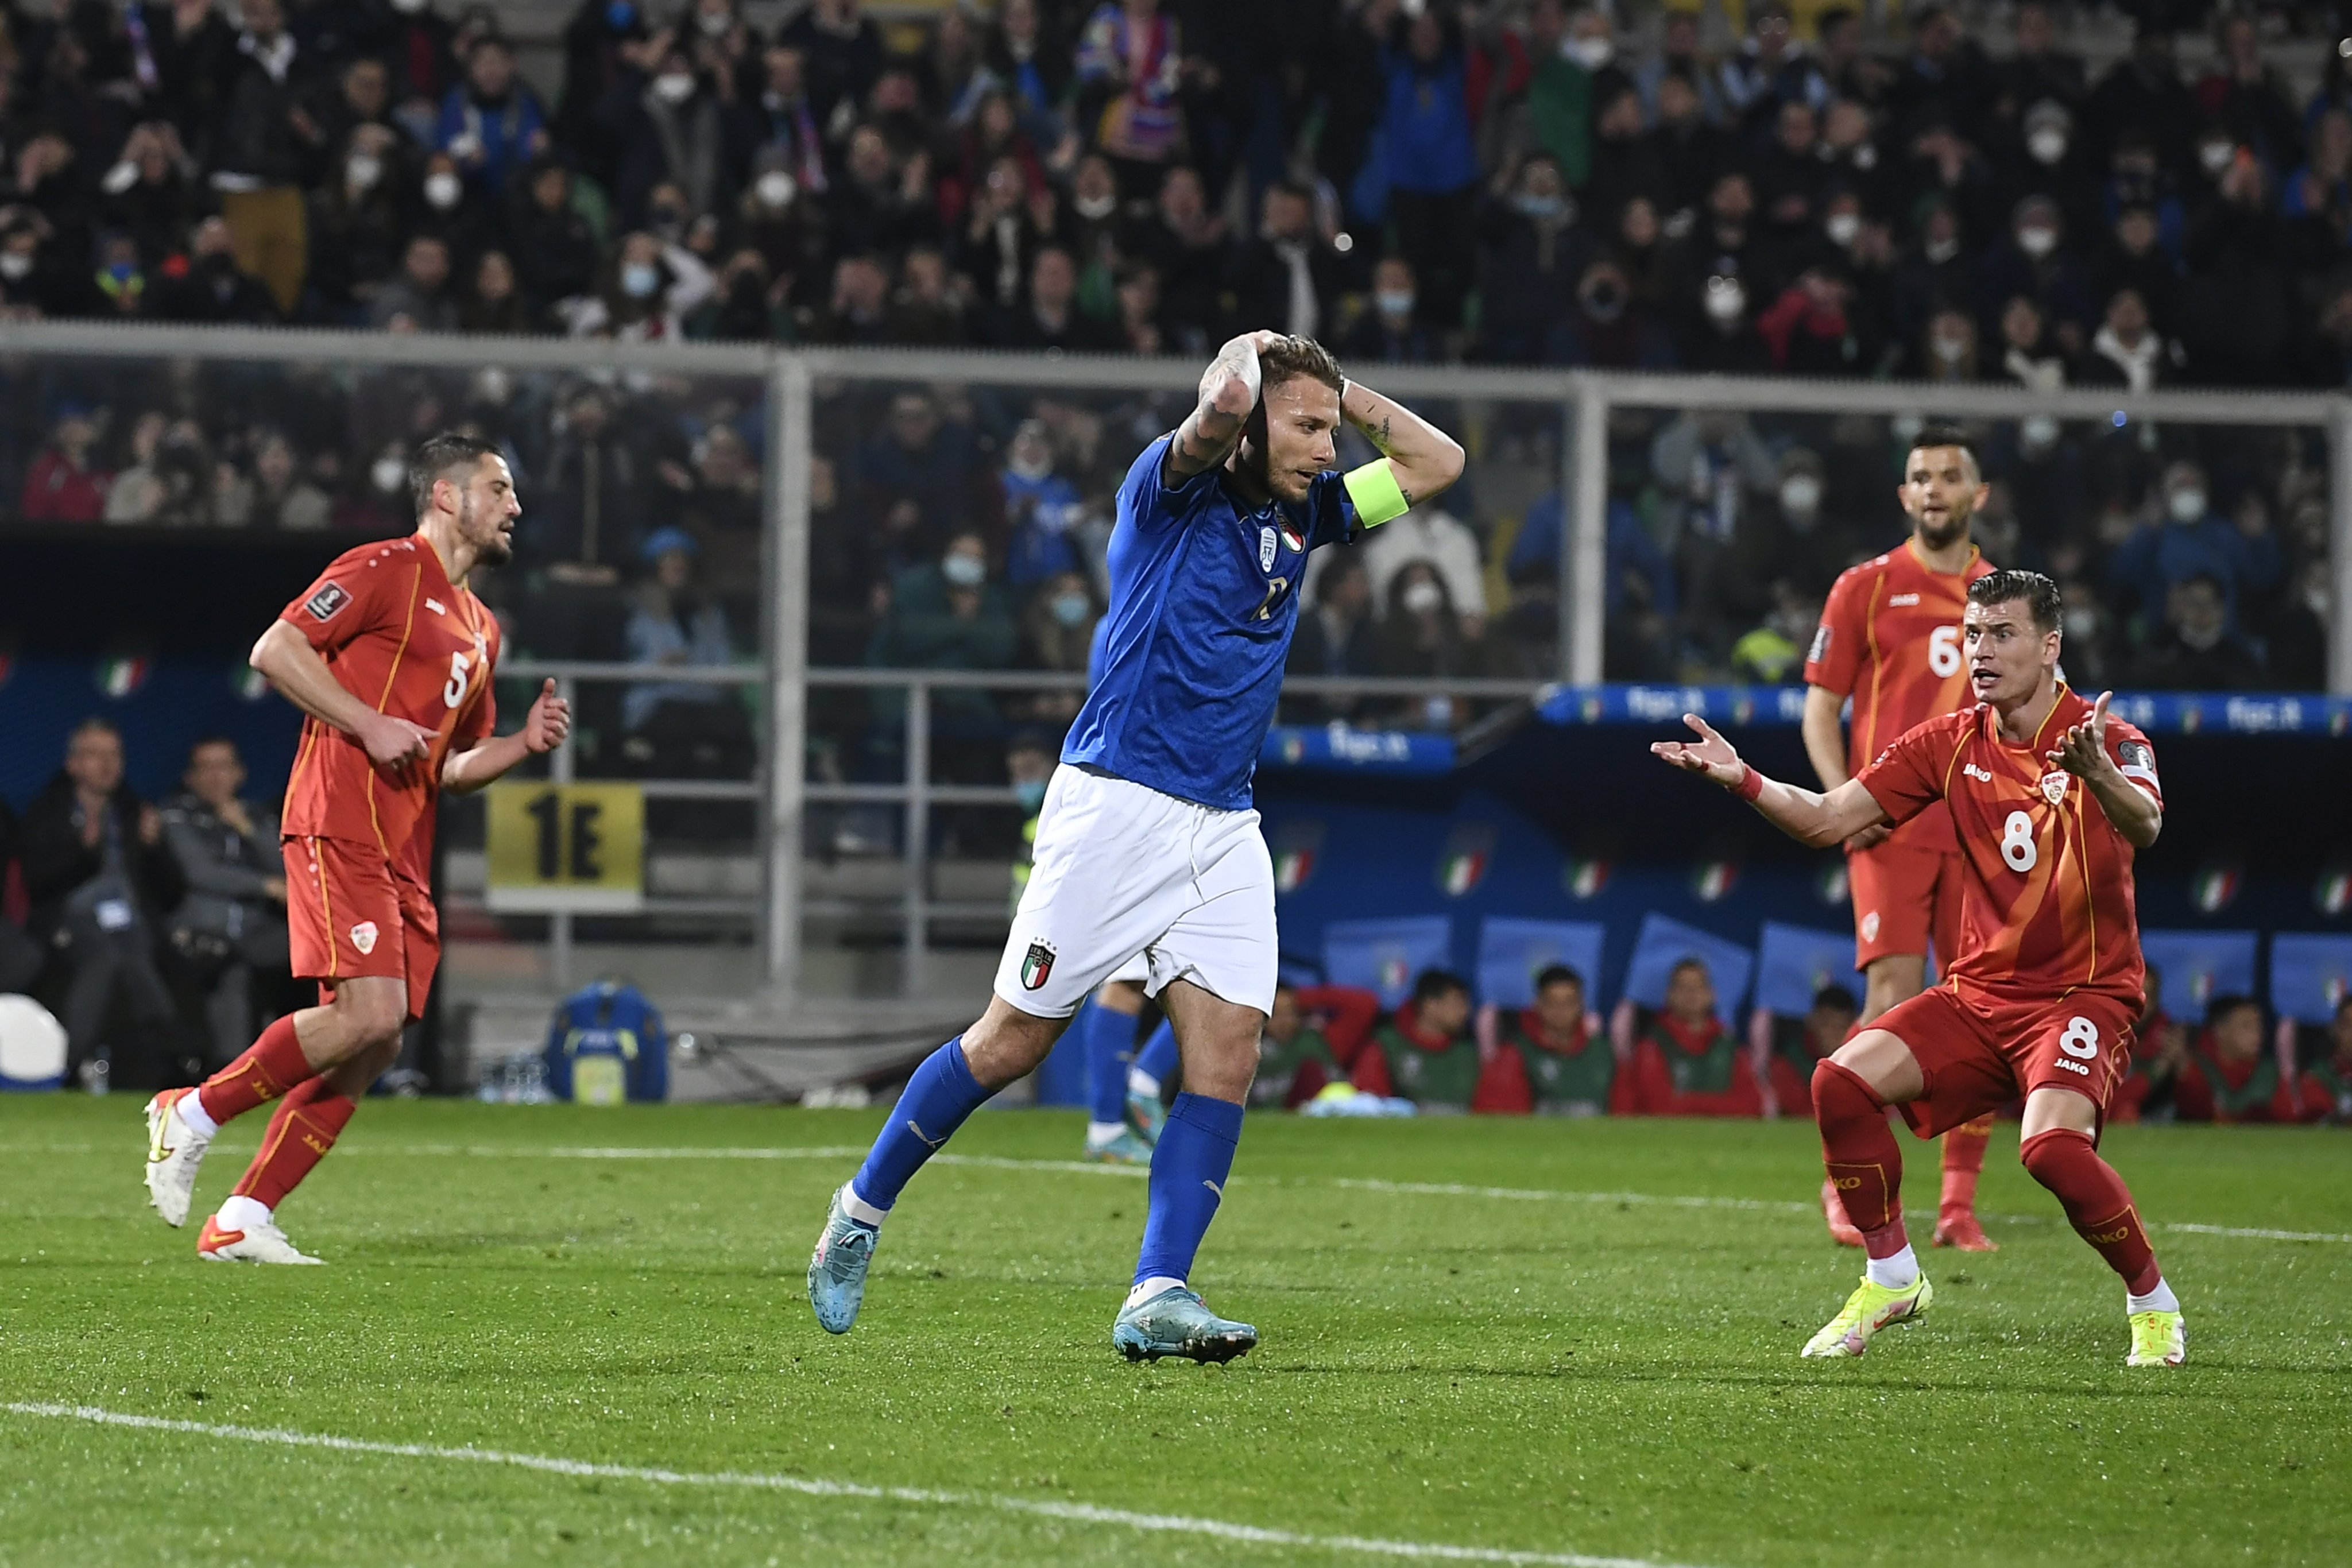 Italy 0-1 North Macedonia LIVE: Italy are KNOCKED OUT of the World Cup for a second successive time as North Macedonia score a late winner to meet Portugal in the final World Cup playoffs game